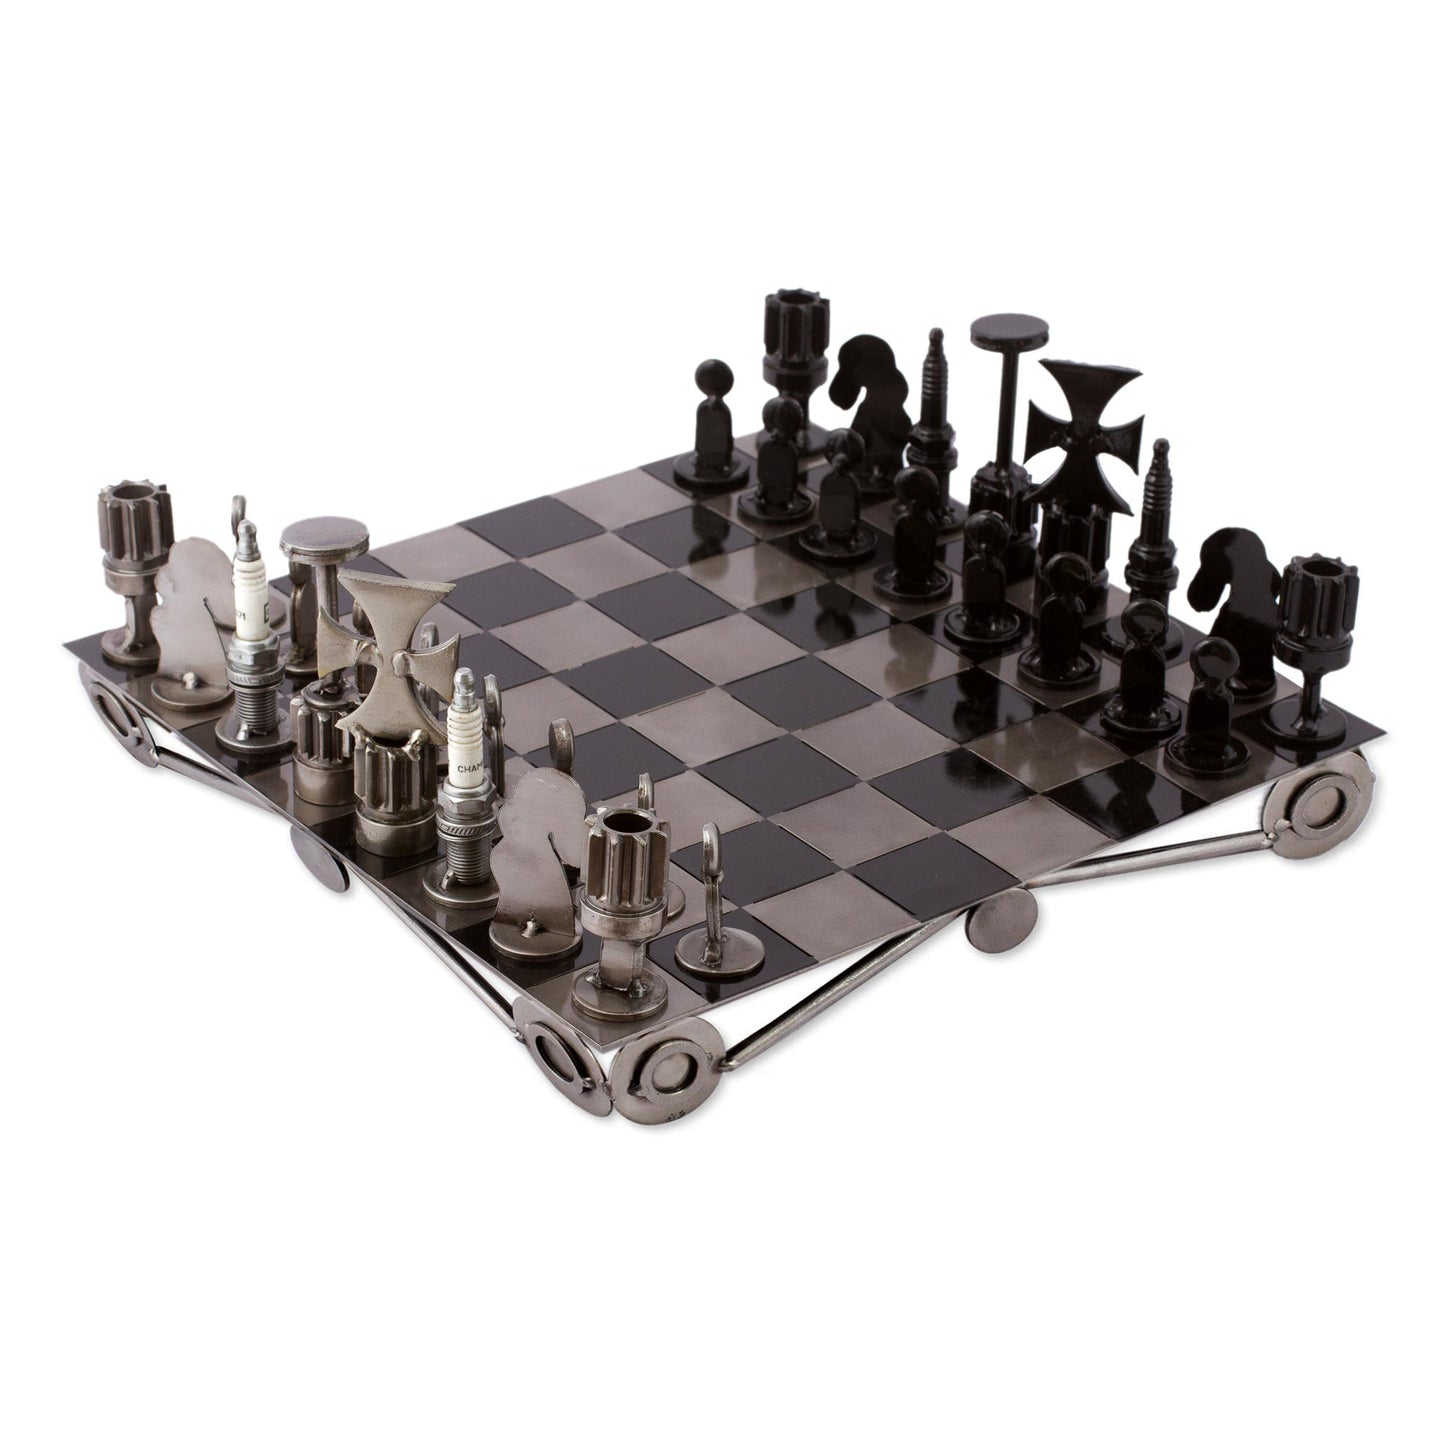 Recycling Challenge Decorative Metal Tabletop Chess Set